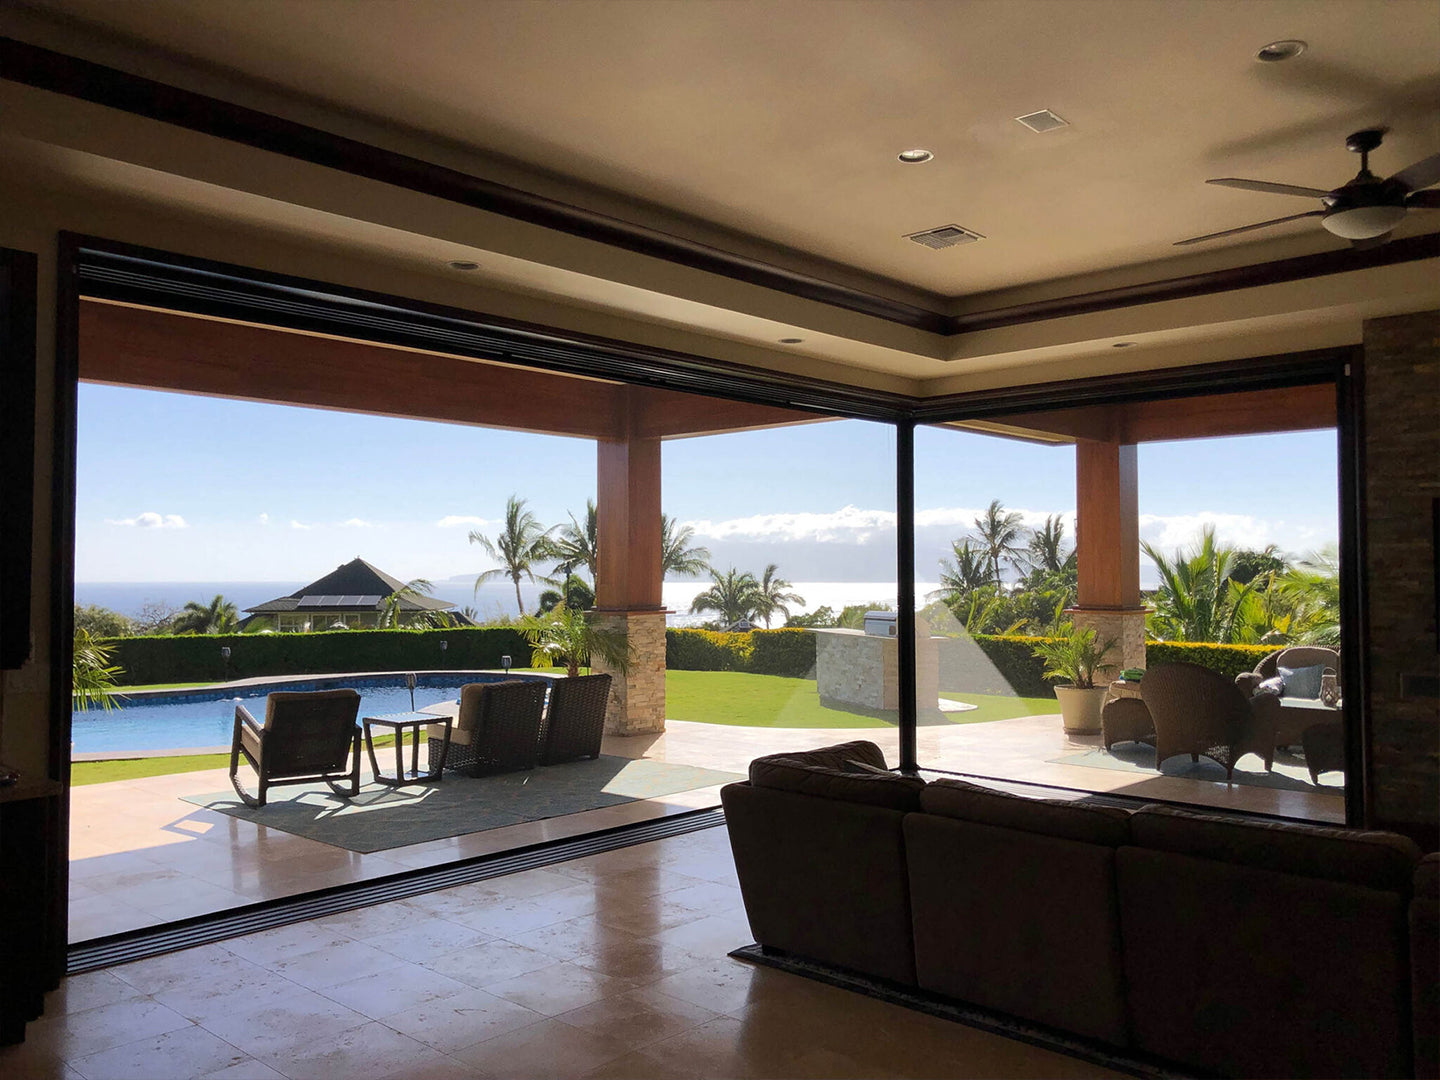 The Horizon Retractable Screens for Large Openings